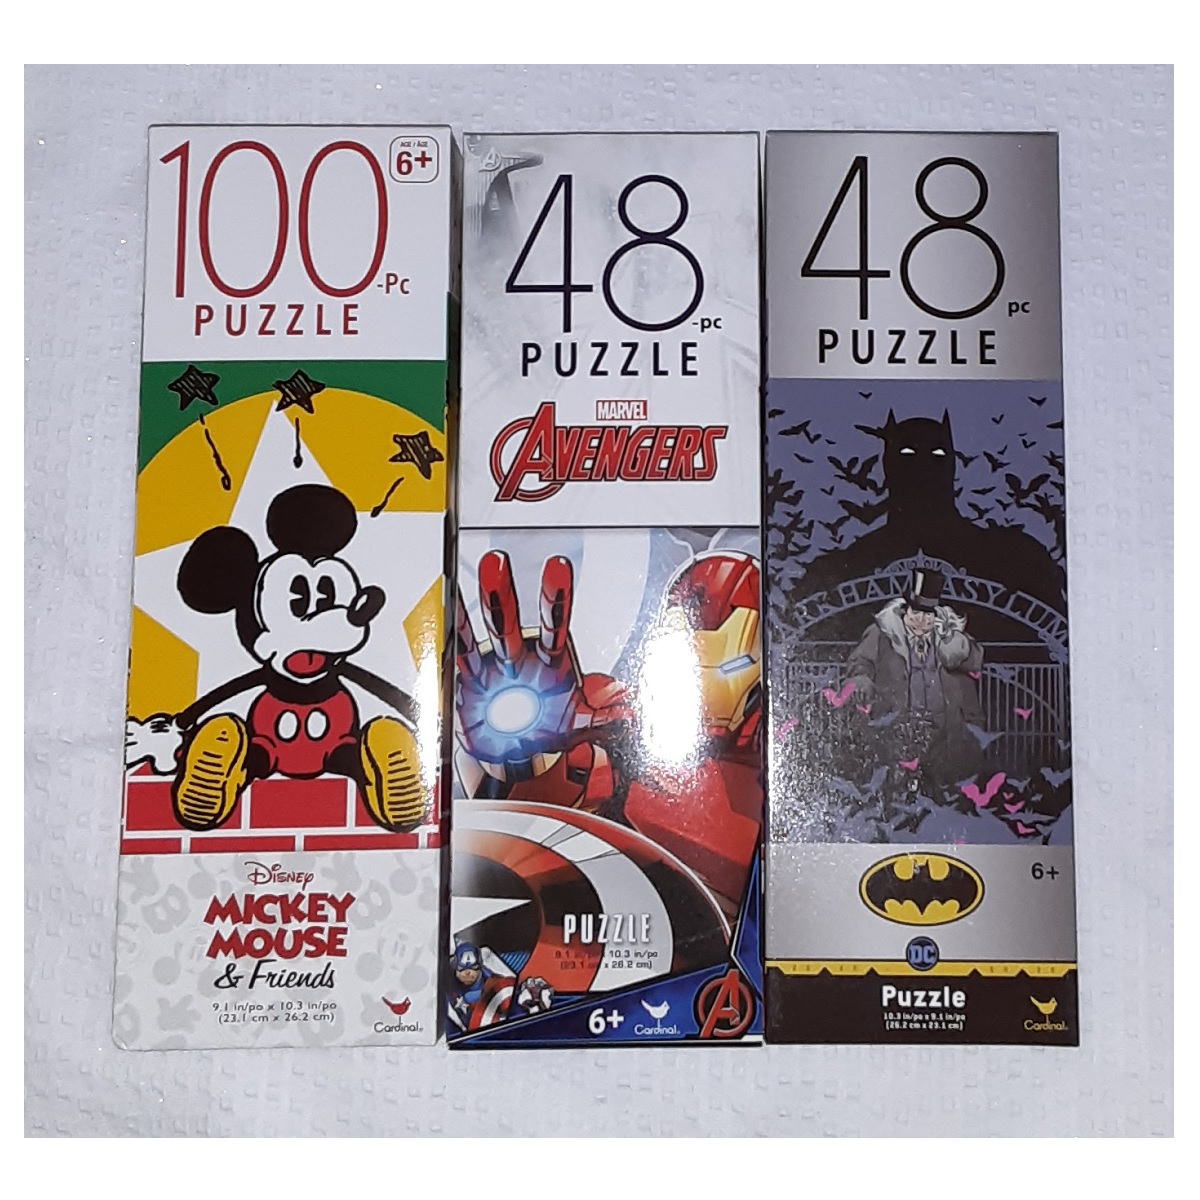 You get 3 puzzles. One each of Mickey Mouse & Friends, Avengers and Batman